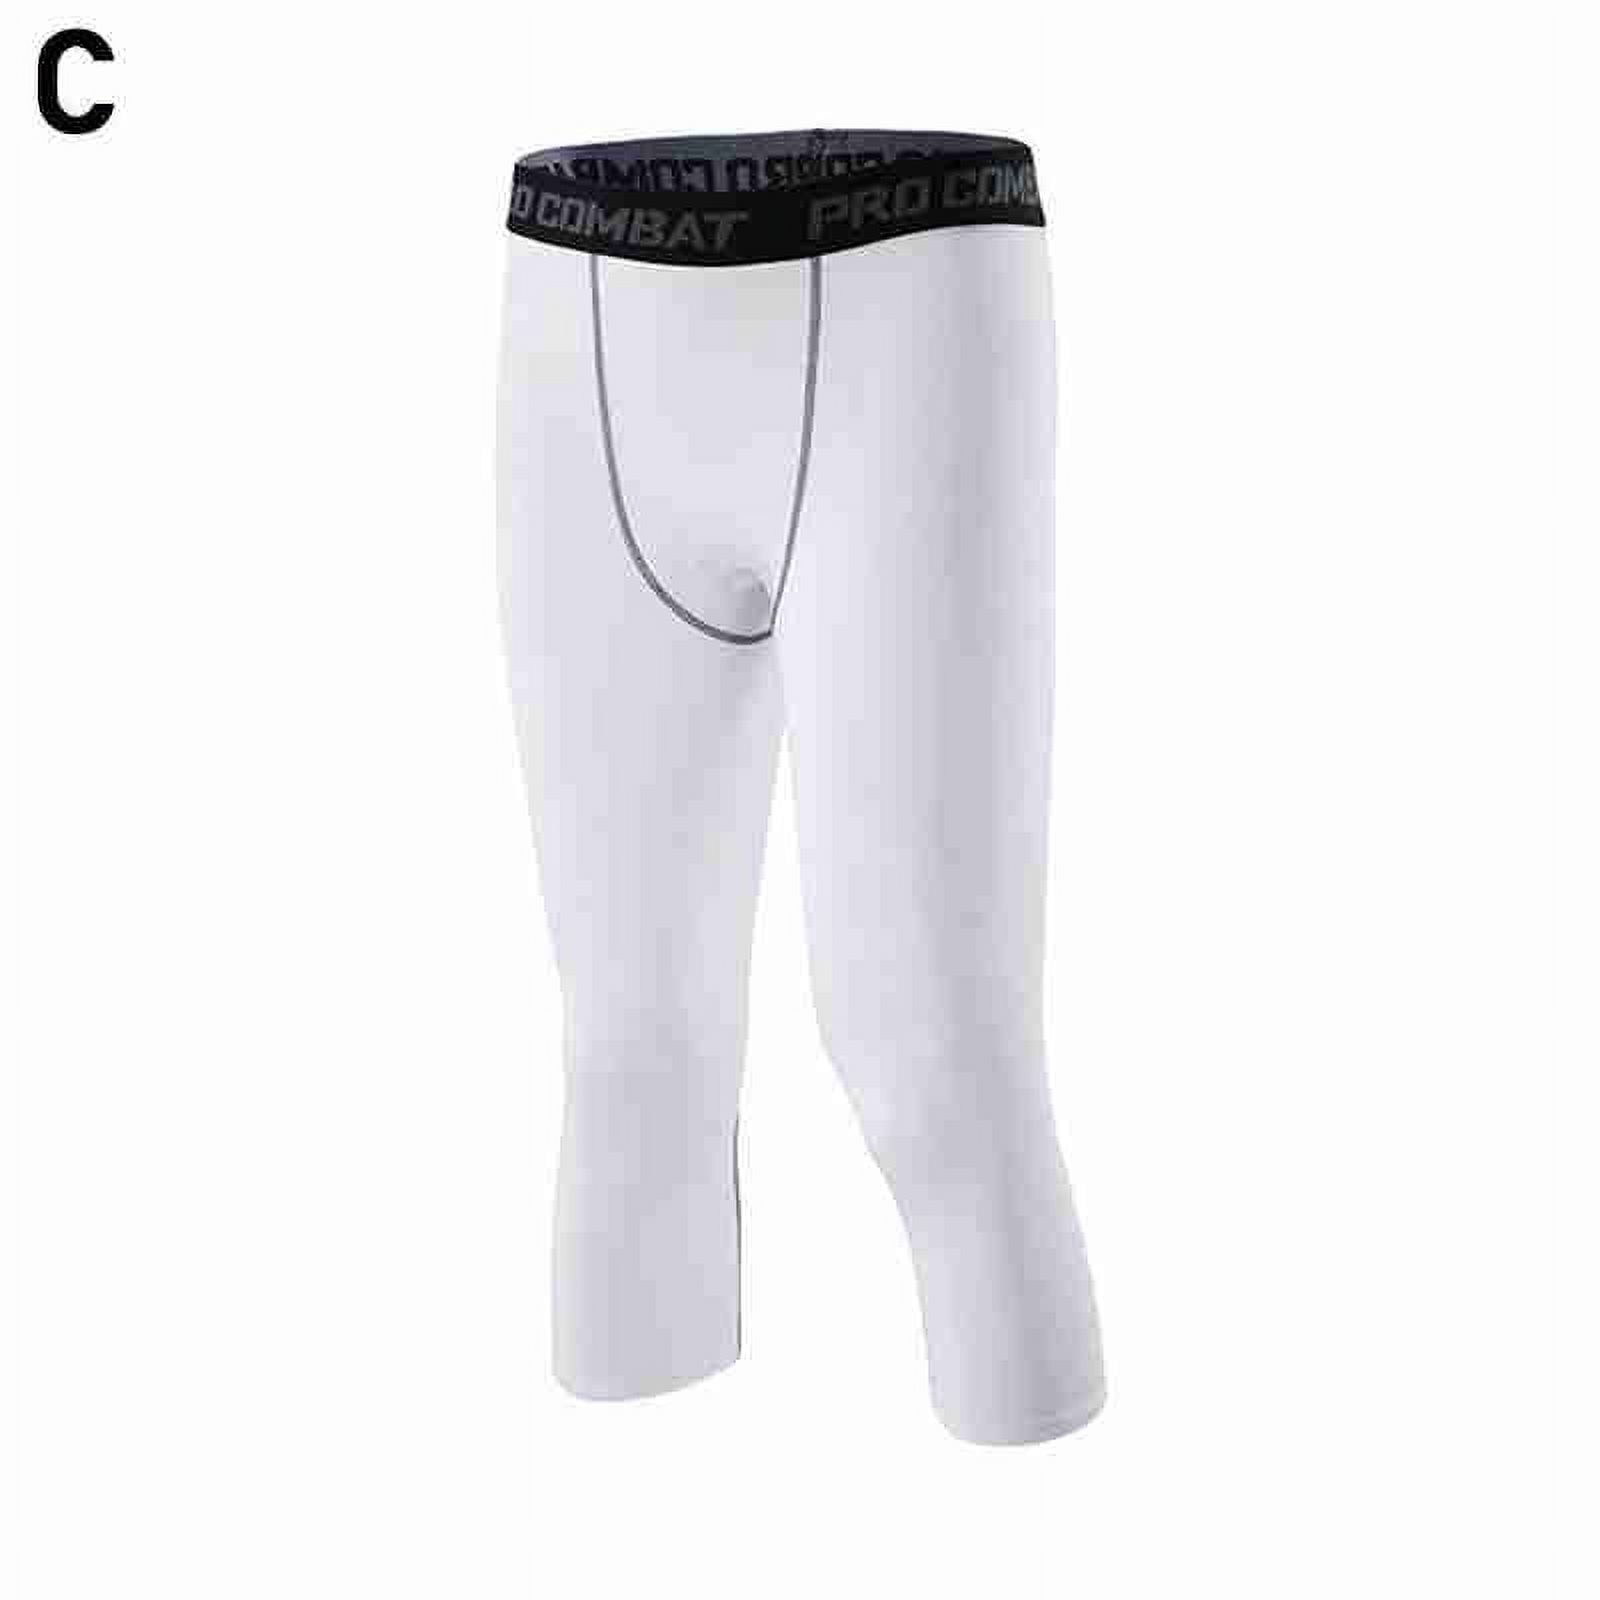 Xmarks Youth Boys' 2 in 1 Compression Pants Breathable Quick Dry